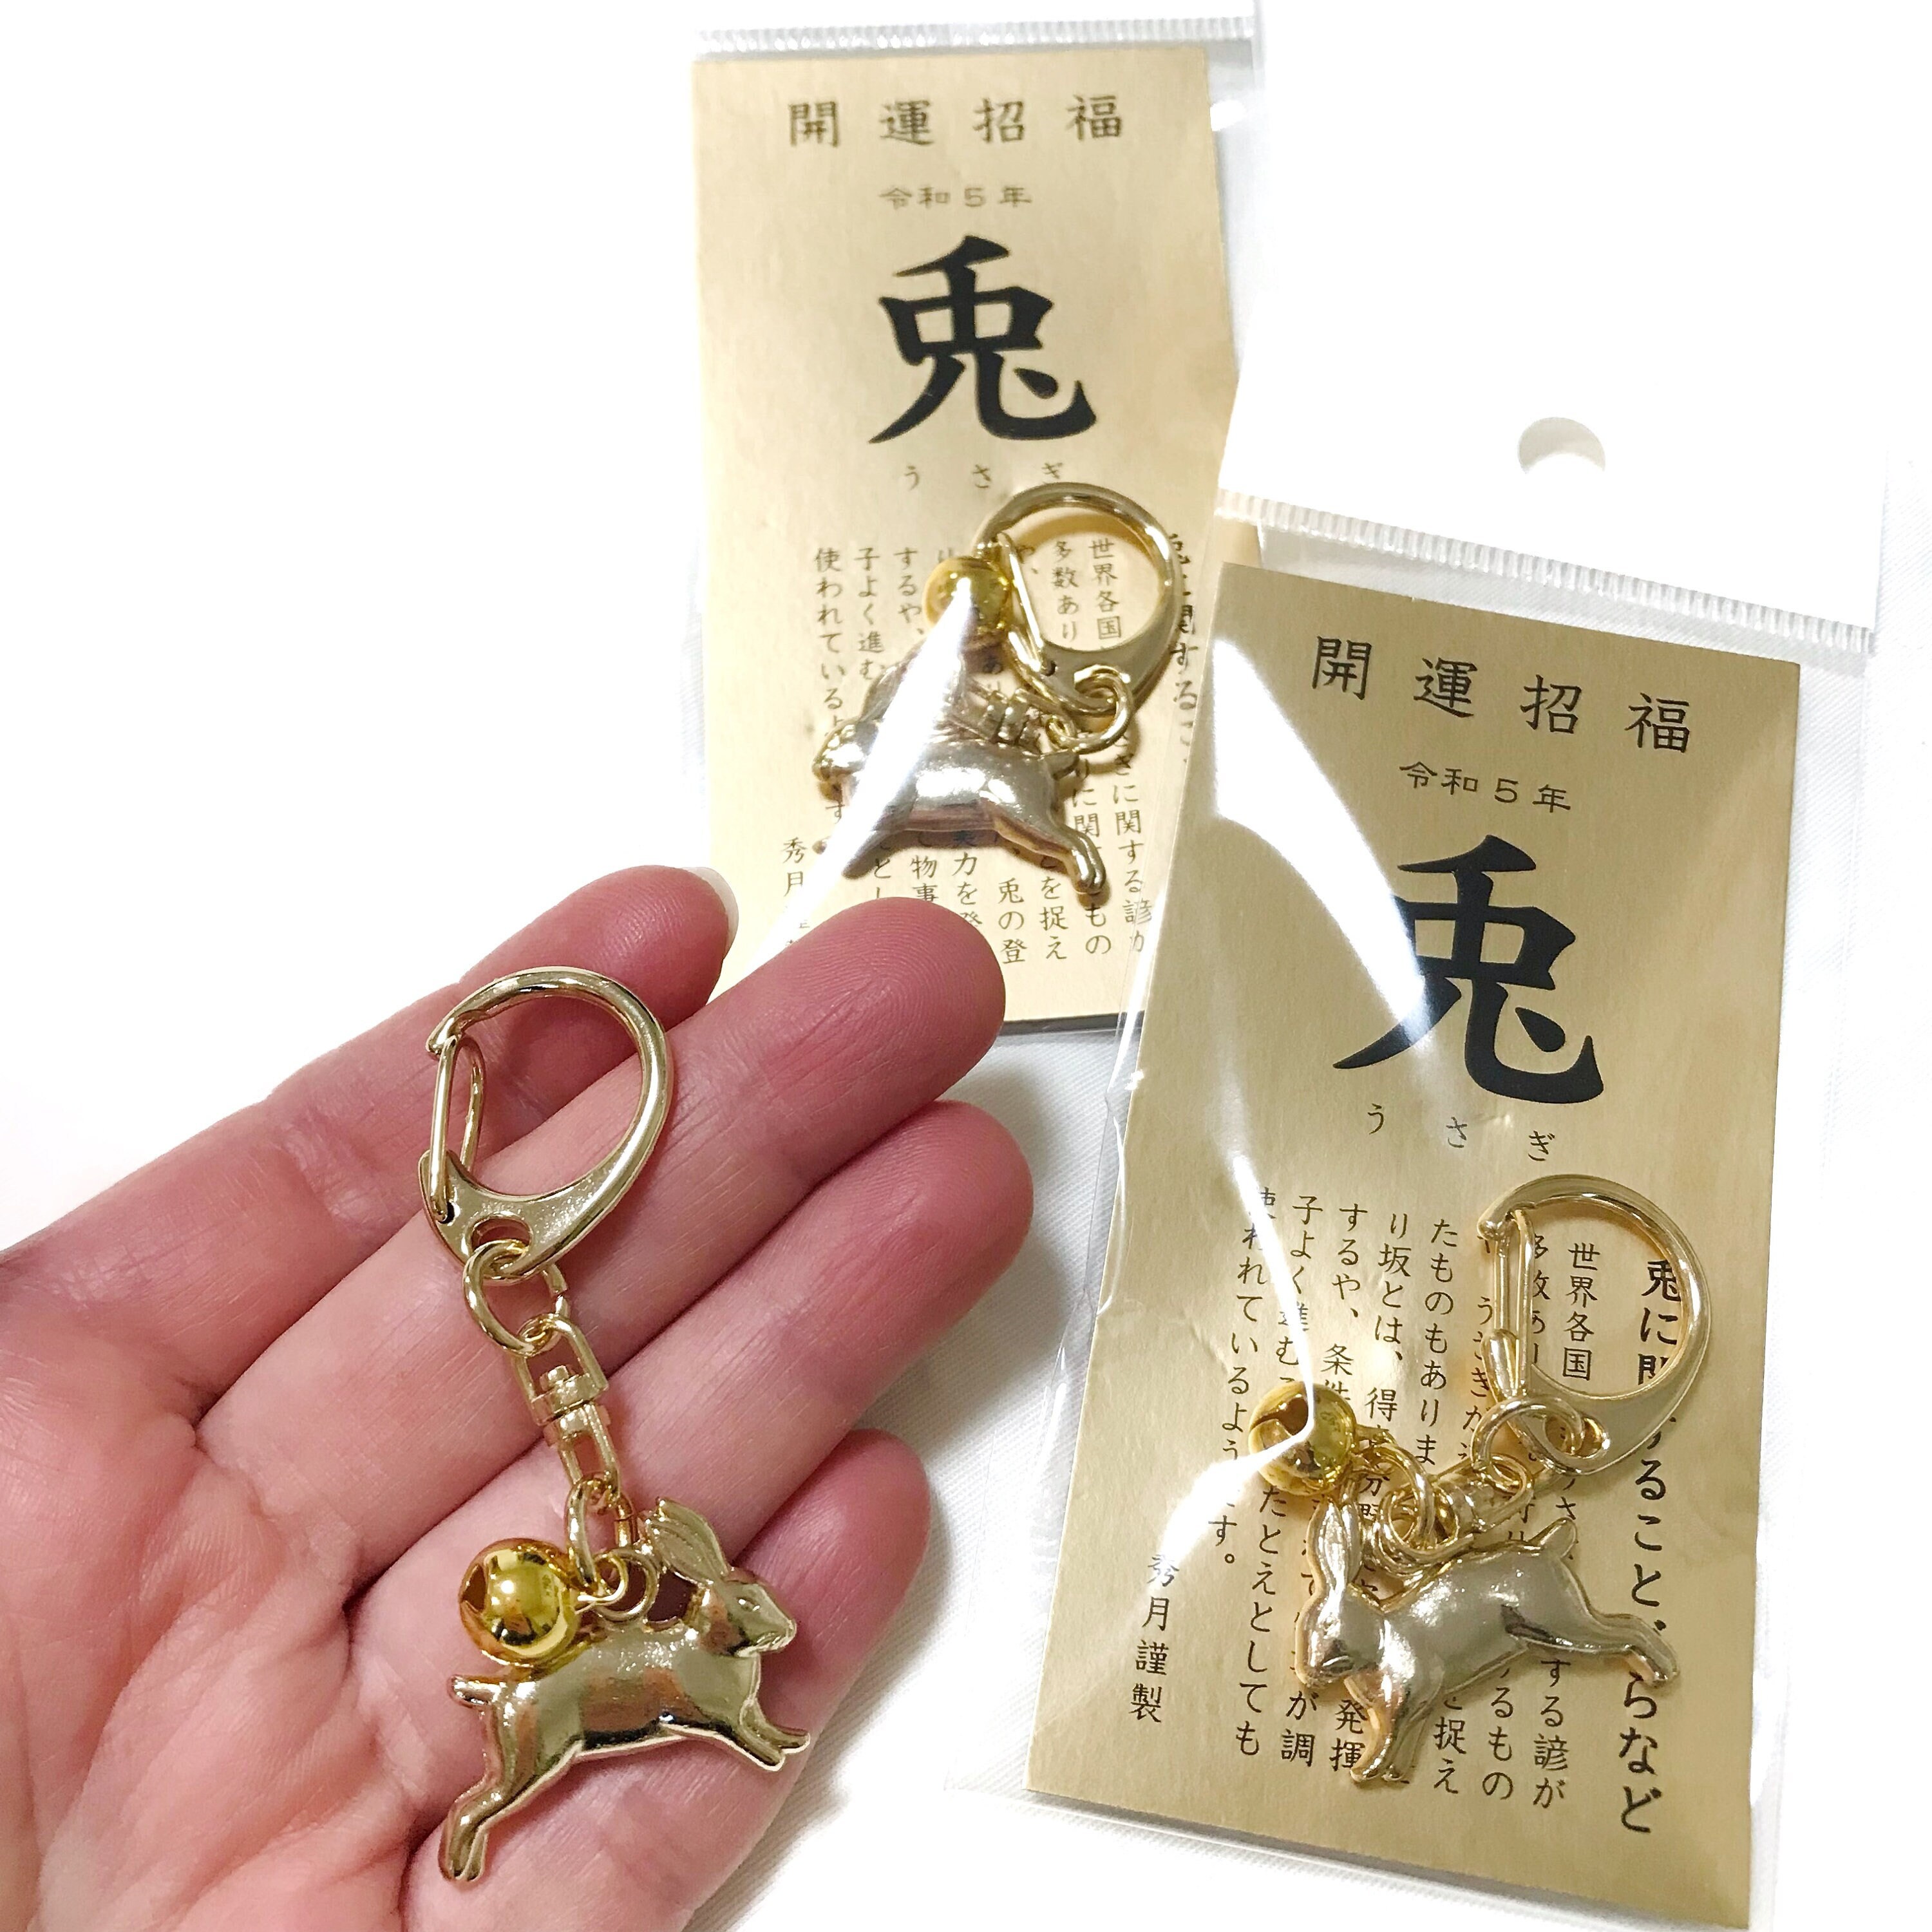 China Wholesale Custom Fabric Embroidery Woven Stay Remove Before Flight  Textile Home Design Key Chain Rings Holder Key Tag for Travel Souvenir Gift  - China Keychain and Custom Keychain price